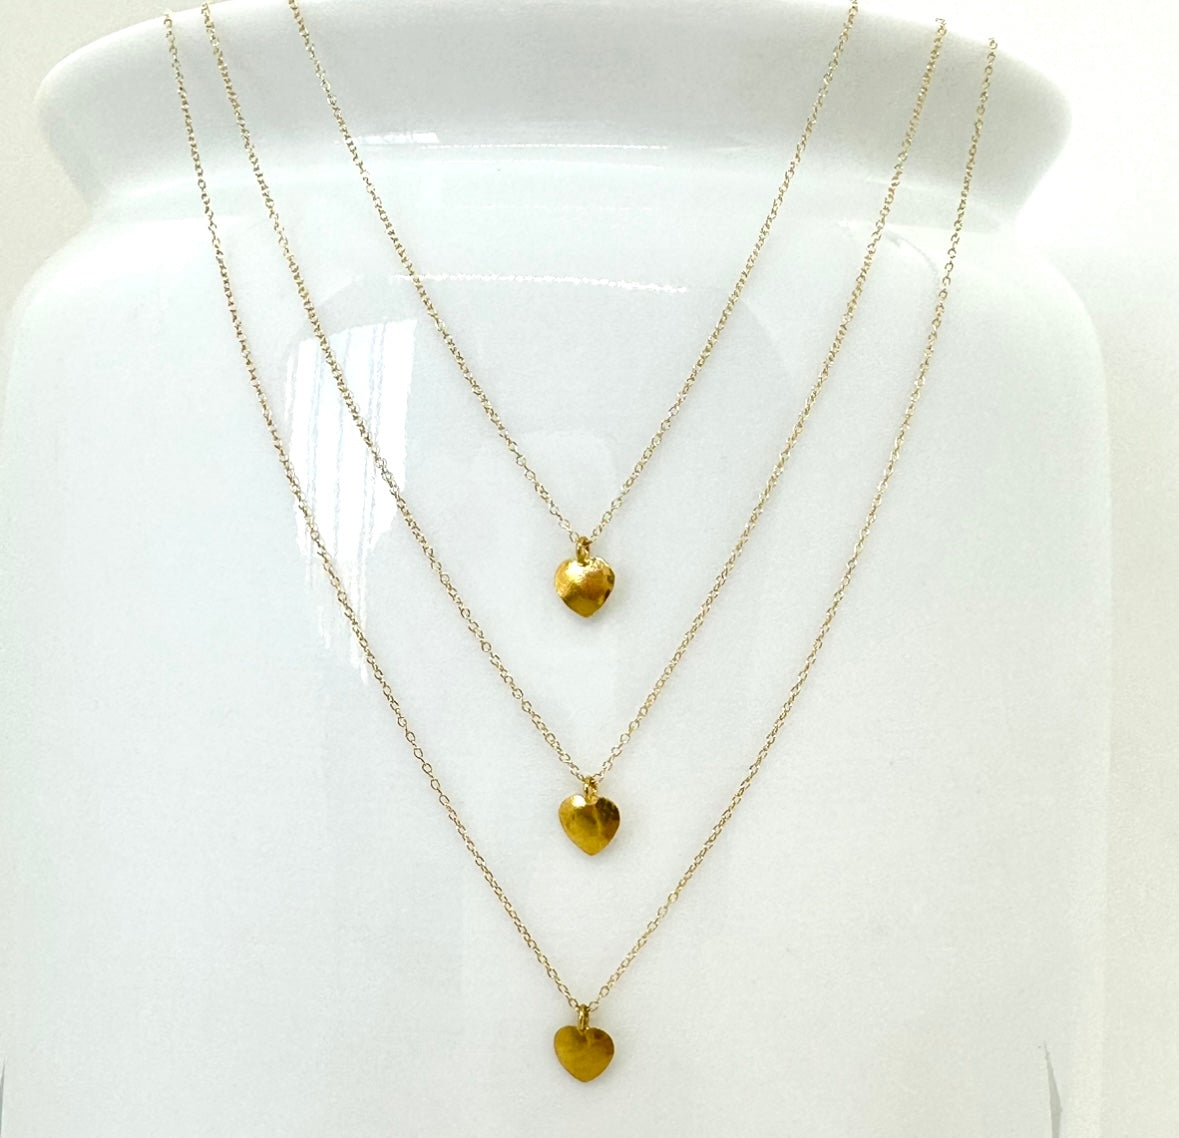 14k Gold Chain Necklace w/ 18k Gold Heart